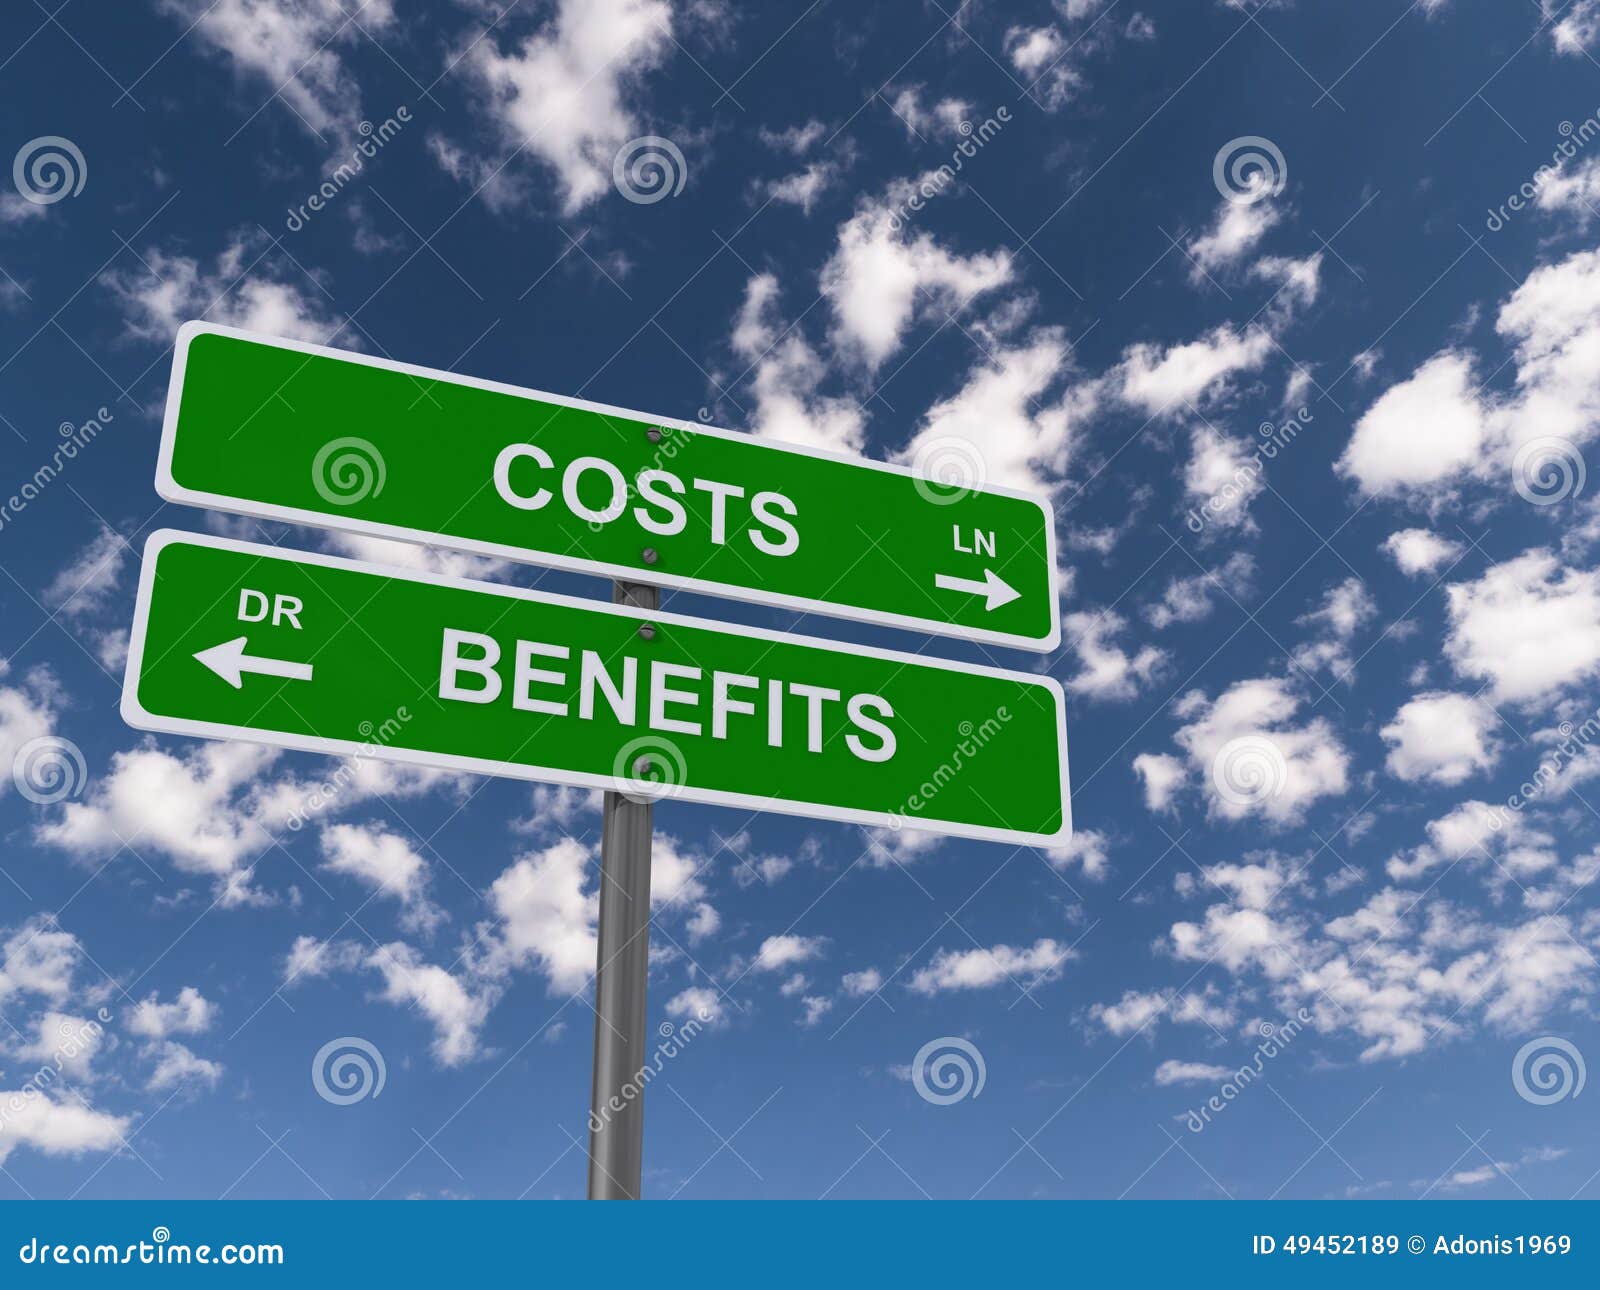 costs and benefits